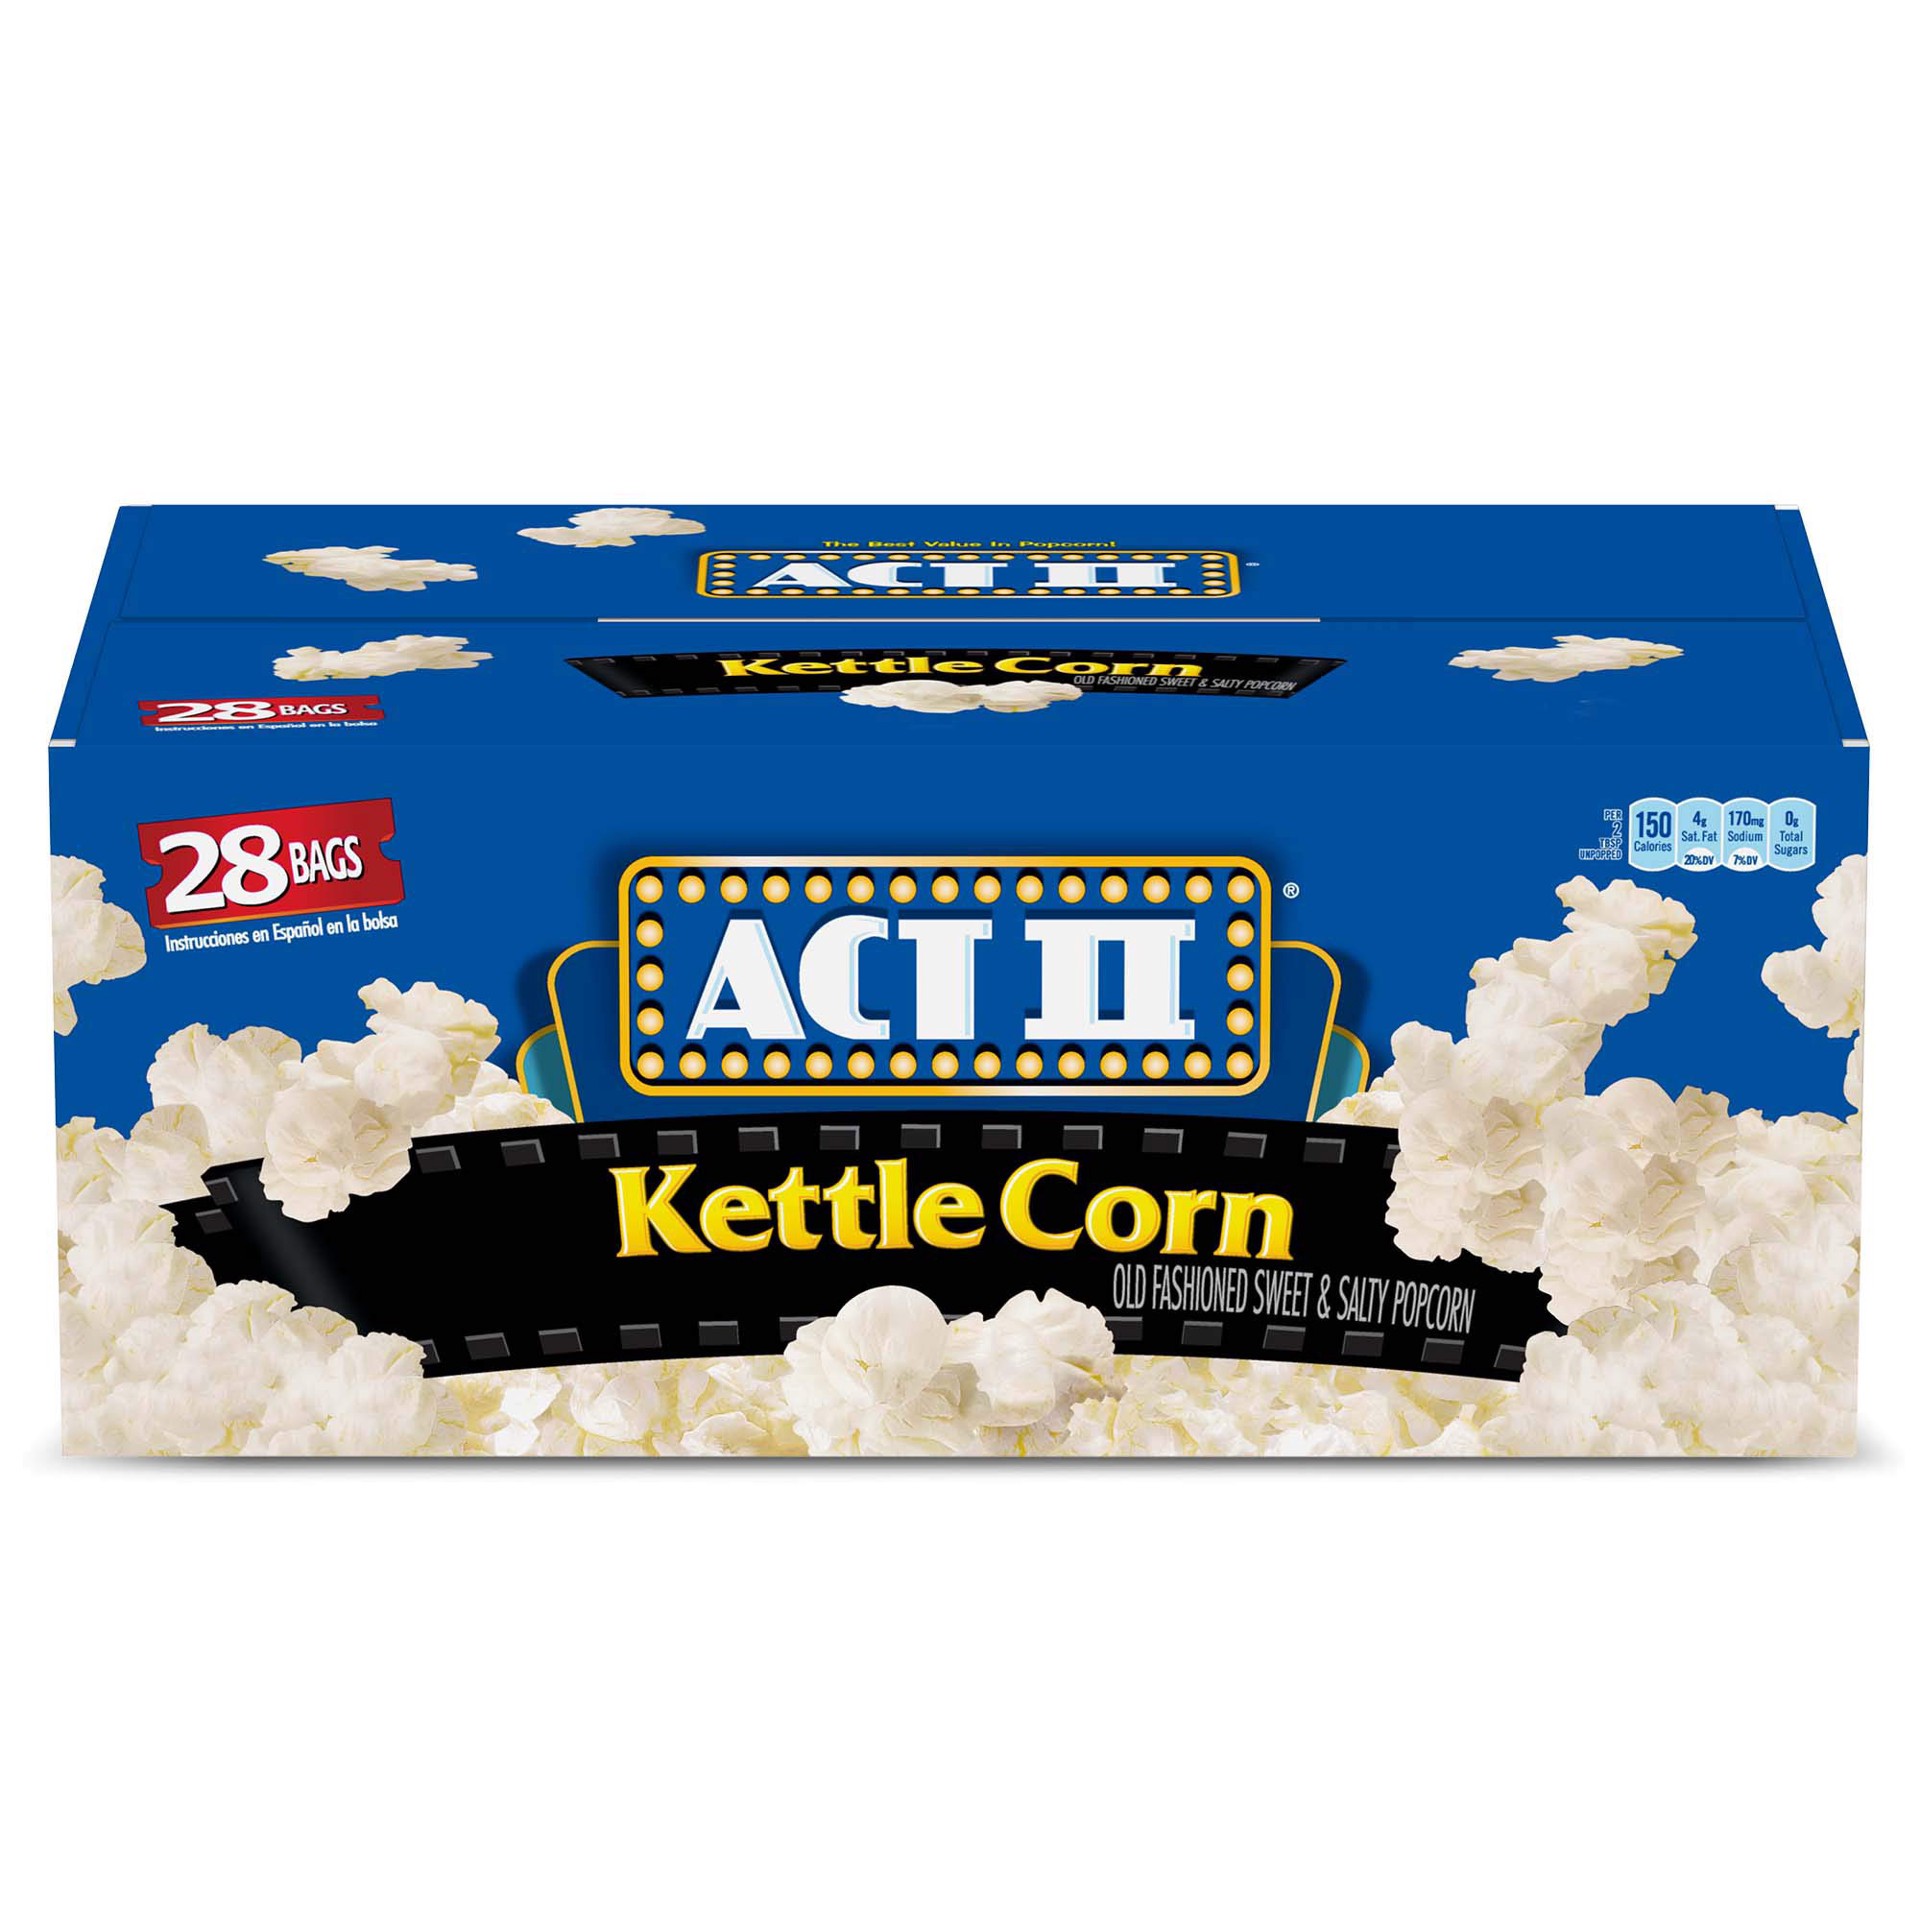 slide 1 of 5, ACT II Kettle Corn Old Fashioned Sweet & Salty Microwave Popcorn Bag 28 - 2.75 oz Bags, 28 ct